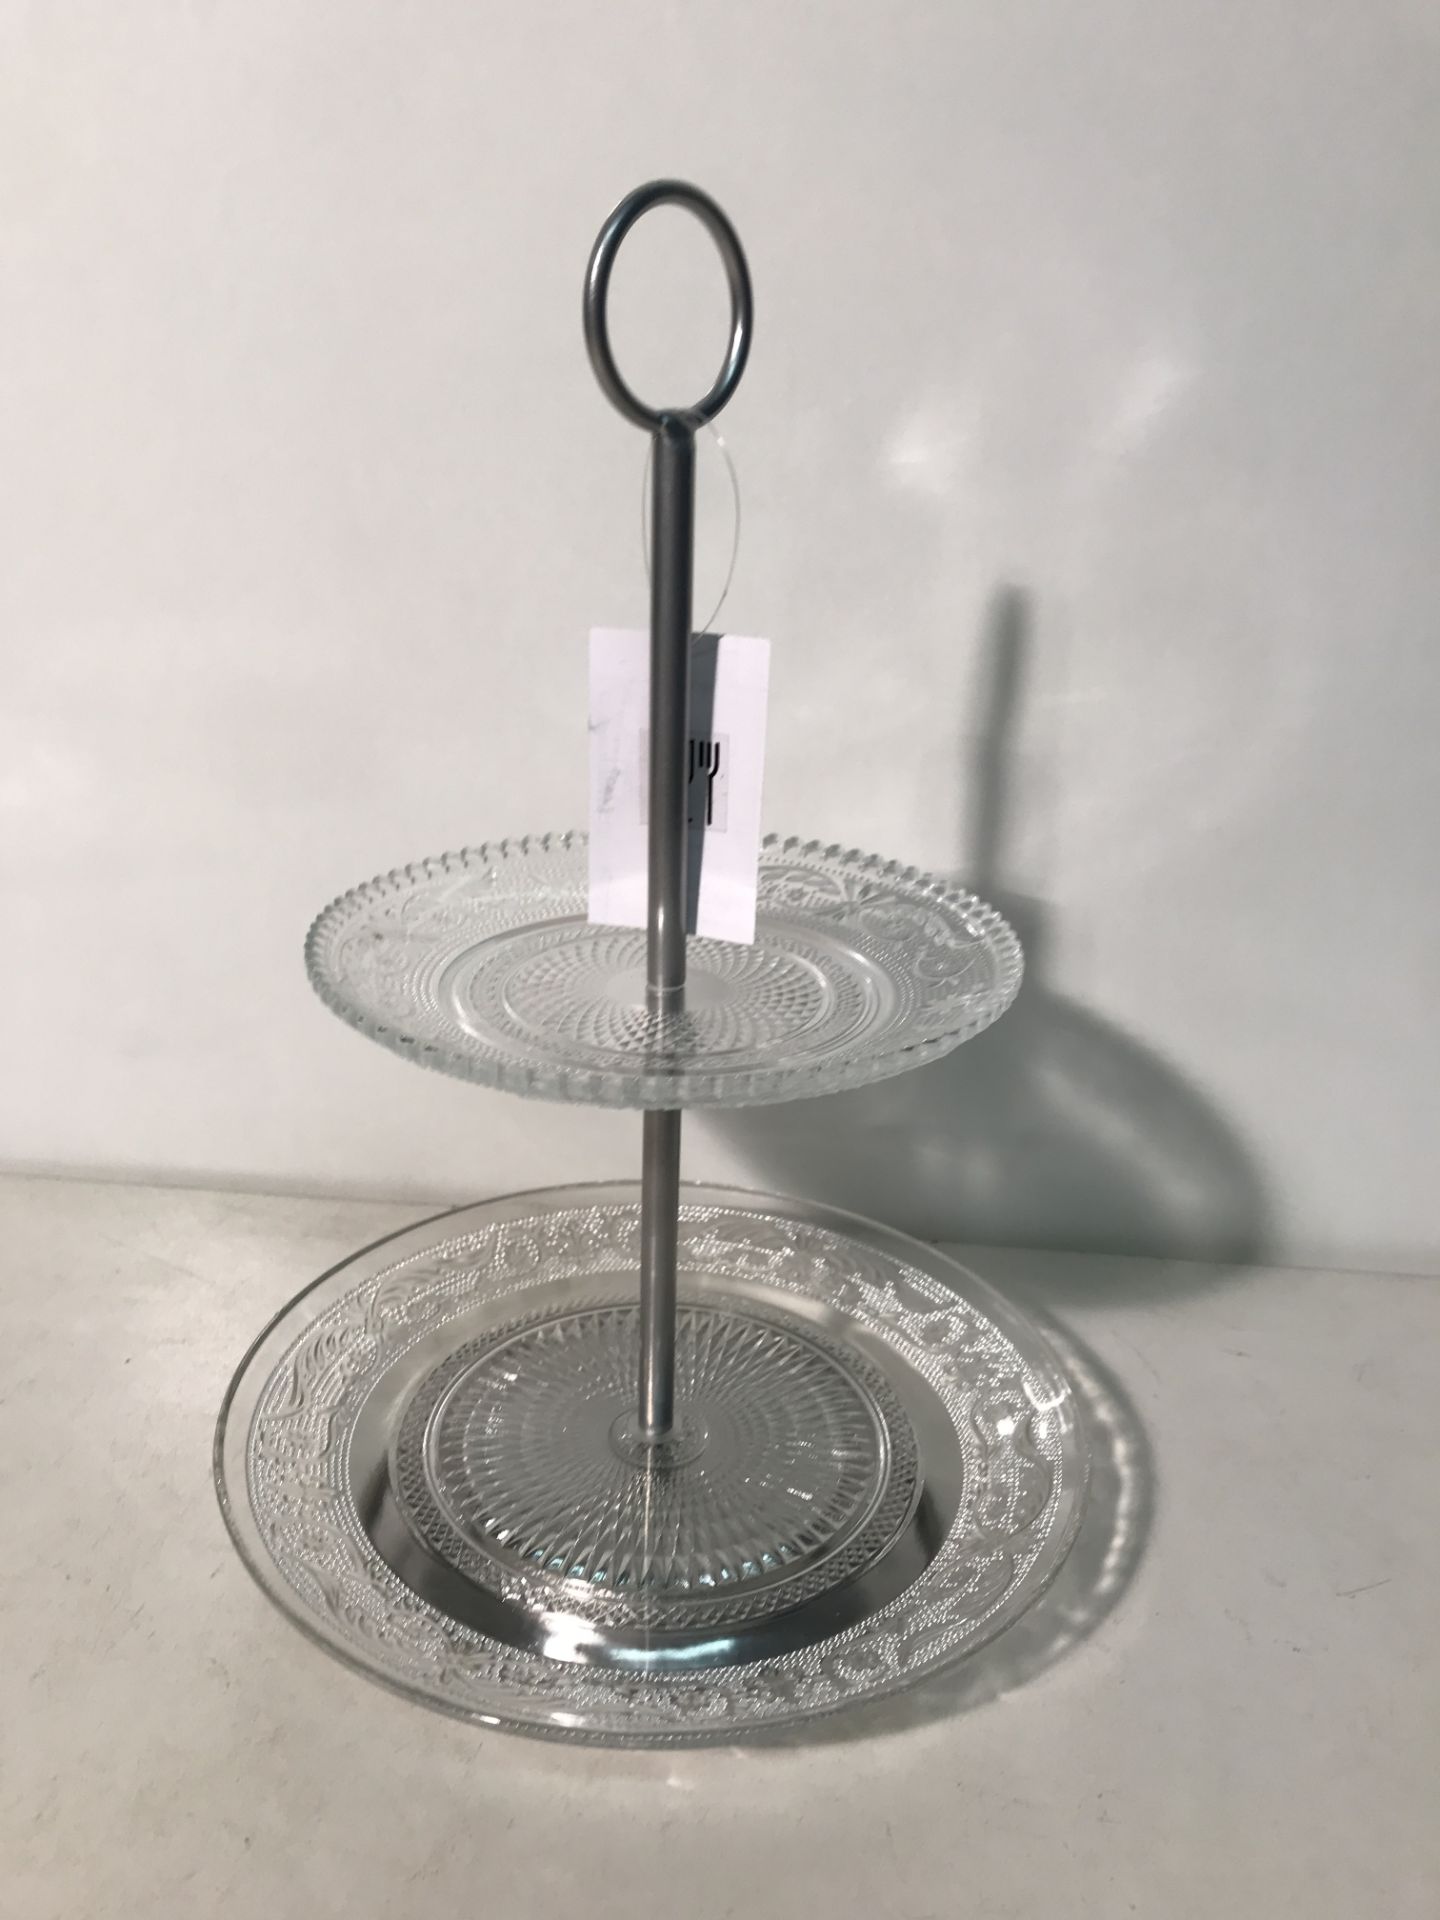 8 x Glass Afternoon Tea Cake Stands - Image 2 of 3